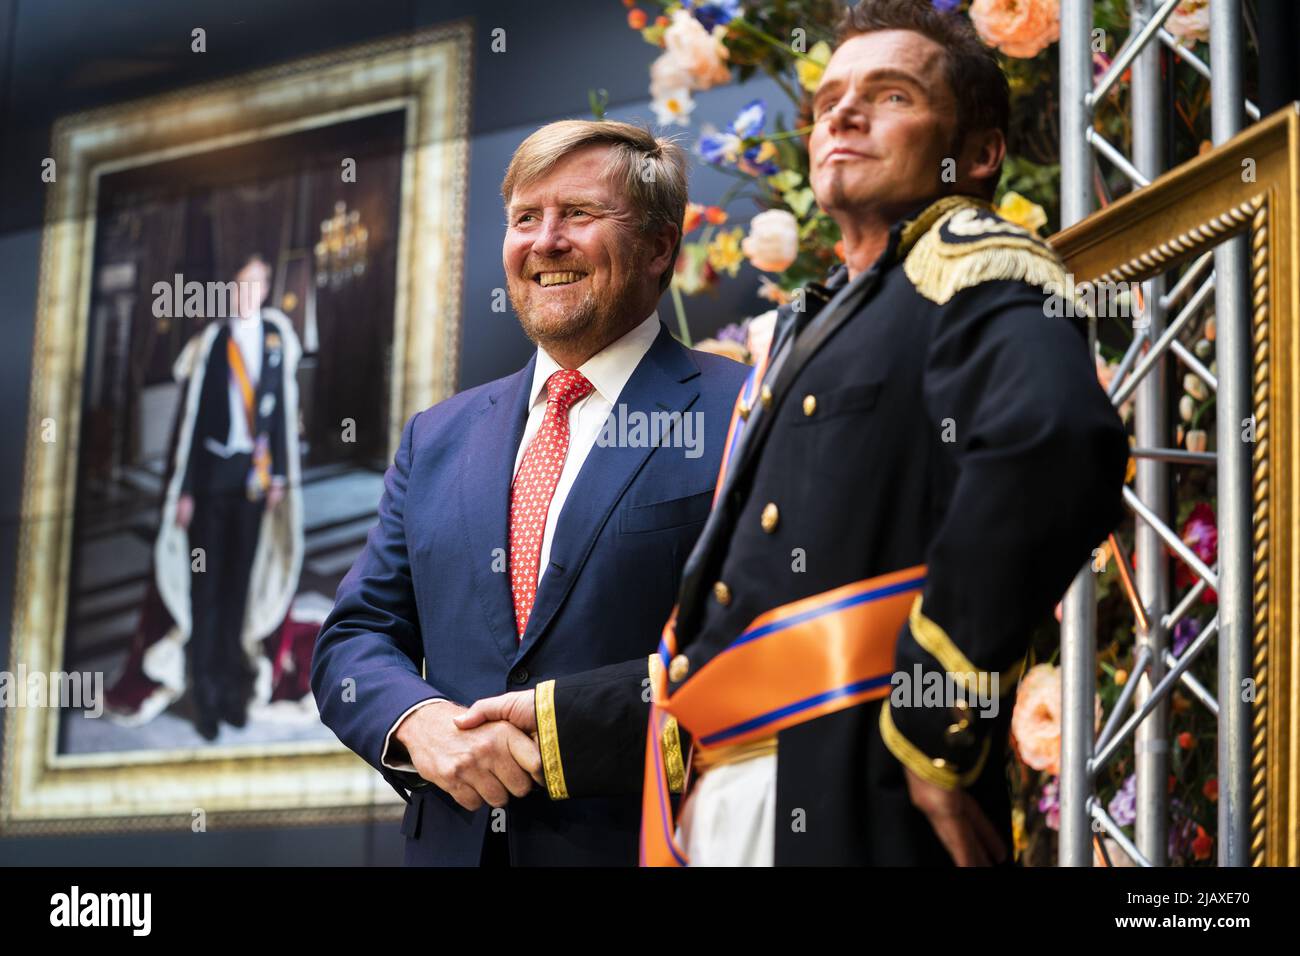 2022-06-01 16:58:54 THE HAGUE - King Willem-Alexander during the opening of the FLASH BACK exhibition in the Mauritshuis in The Hague. In the exhibition, sixteen photographers translate the work of 17th century masters into sixteen new works of art. ANP JEROEN JUMELET netherlands out - belgium out Stock Photo